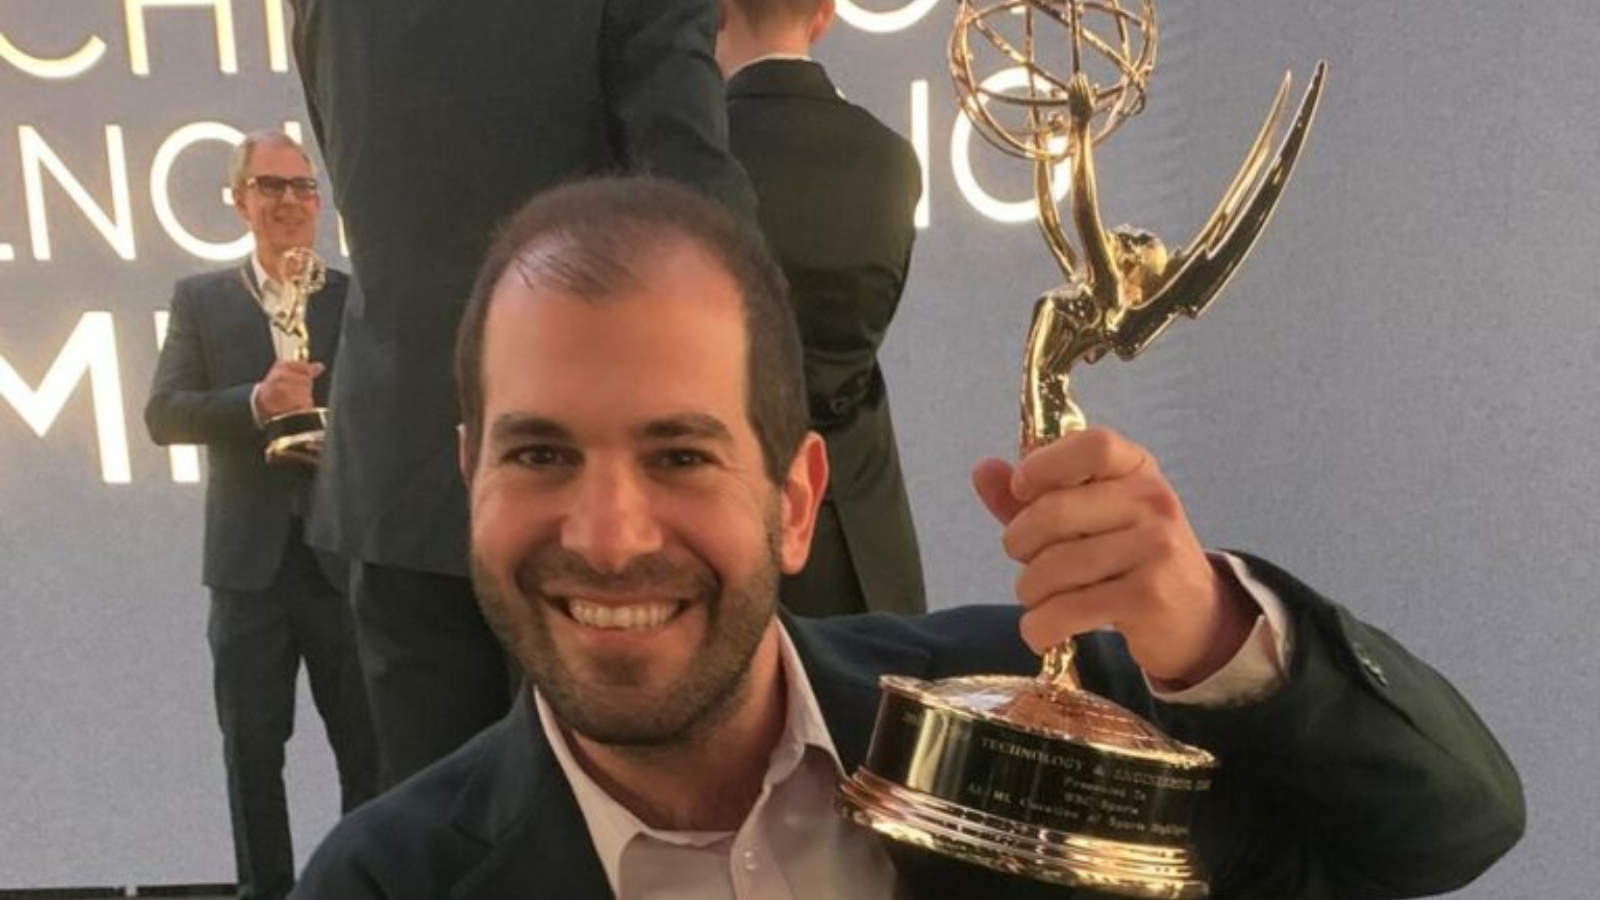 Aviv Arnon, cofounder and chief business development officer at WSC Sports, receiving the Emmy Award. Photo courtesy of WSC Sports